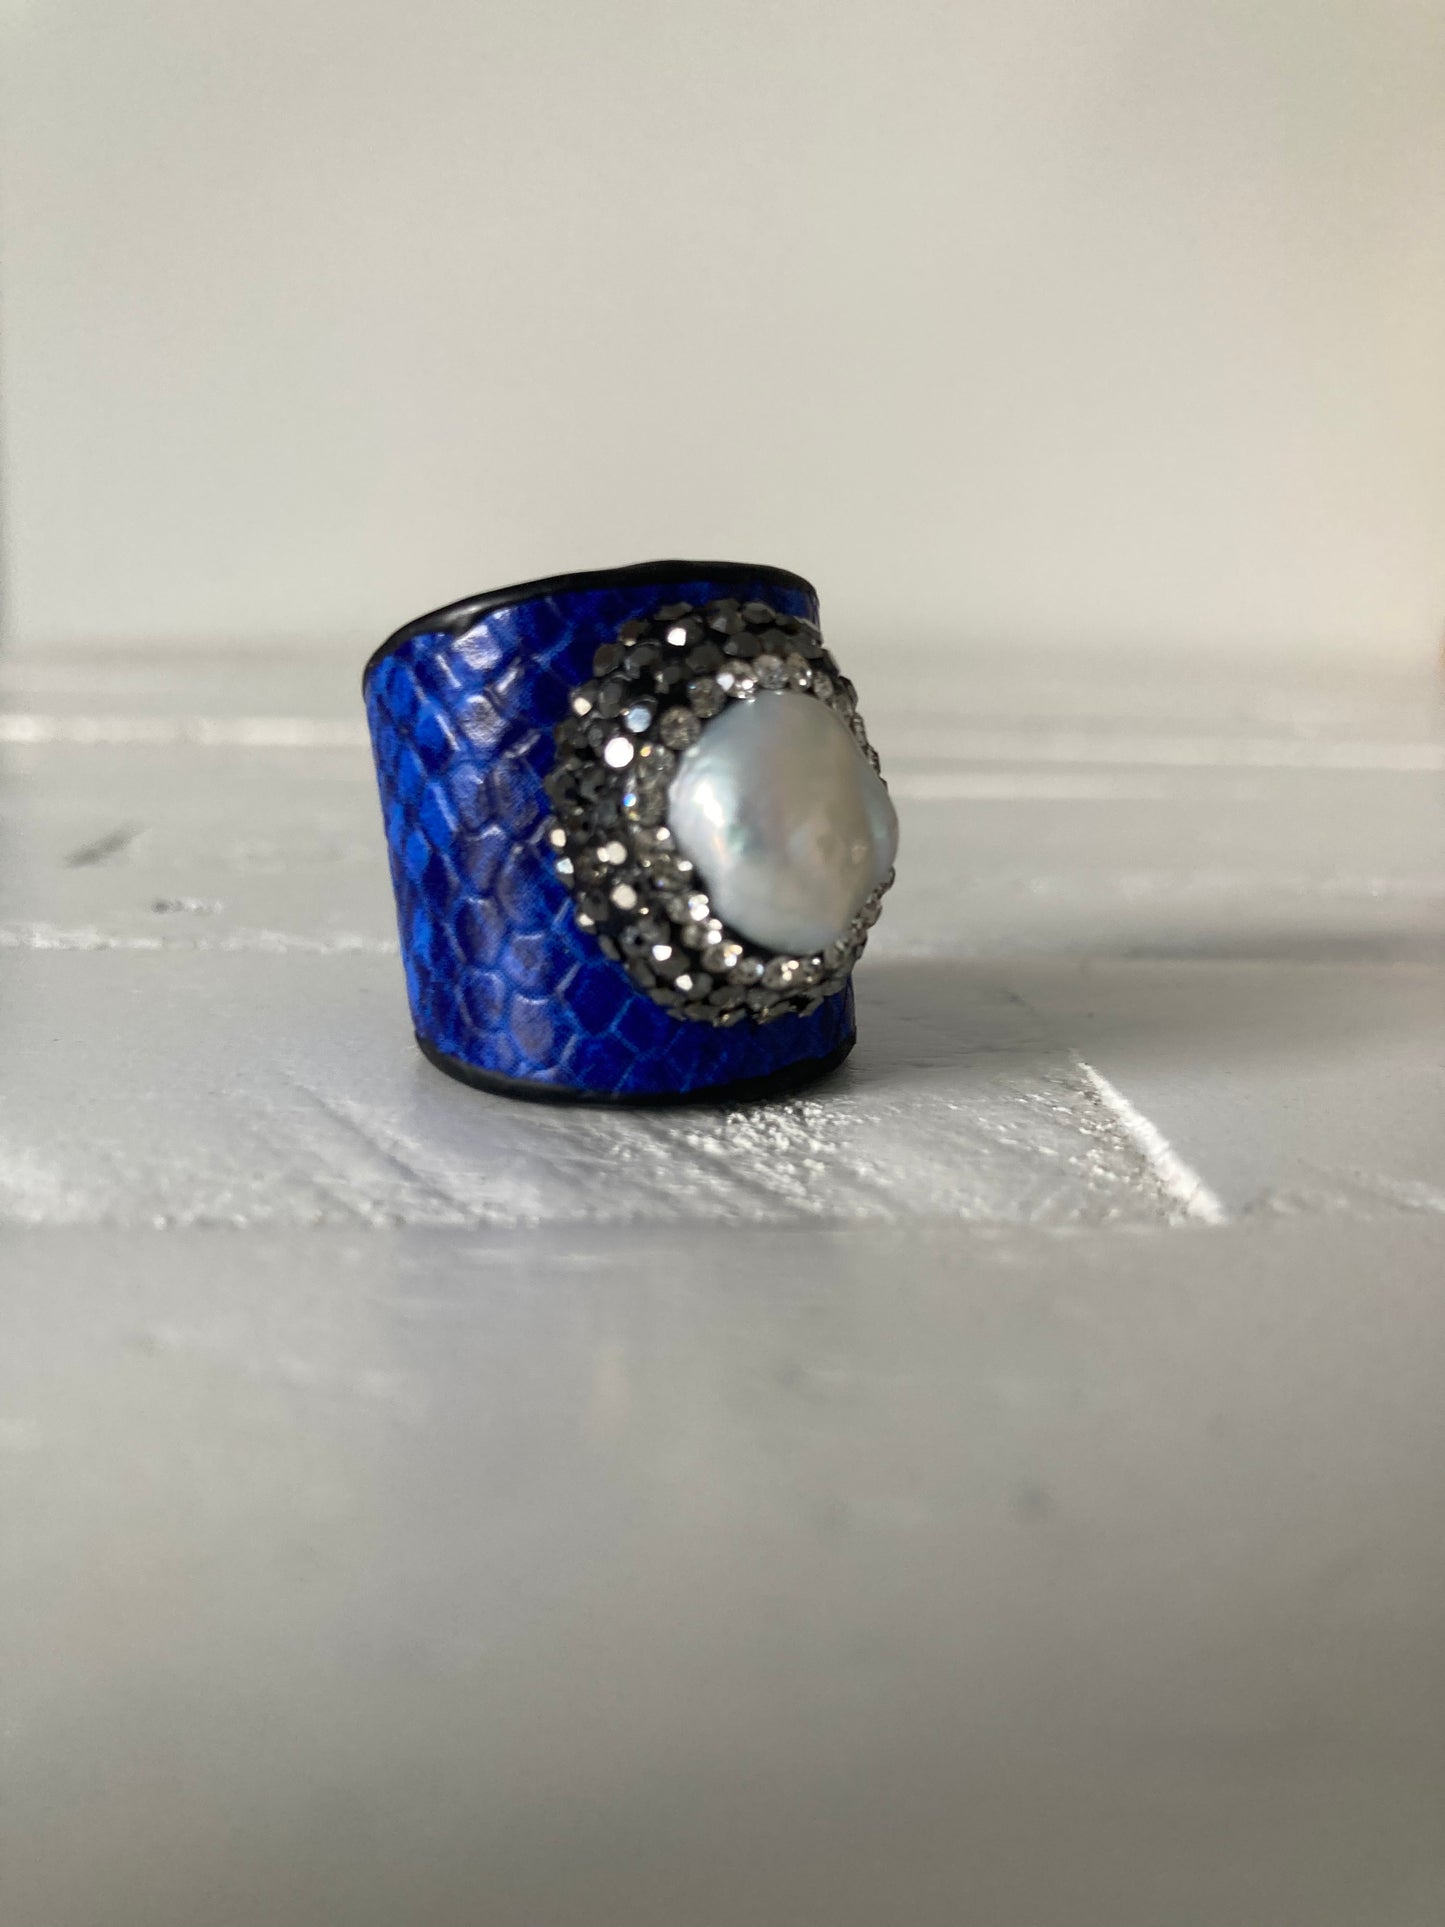 Adjustable Ring Blue Freshwater Pearl